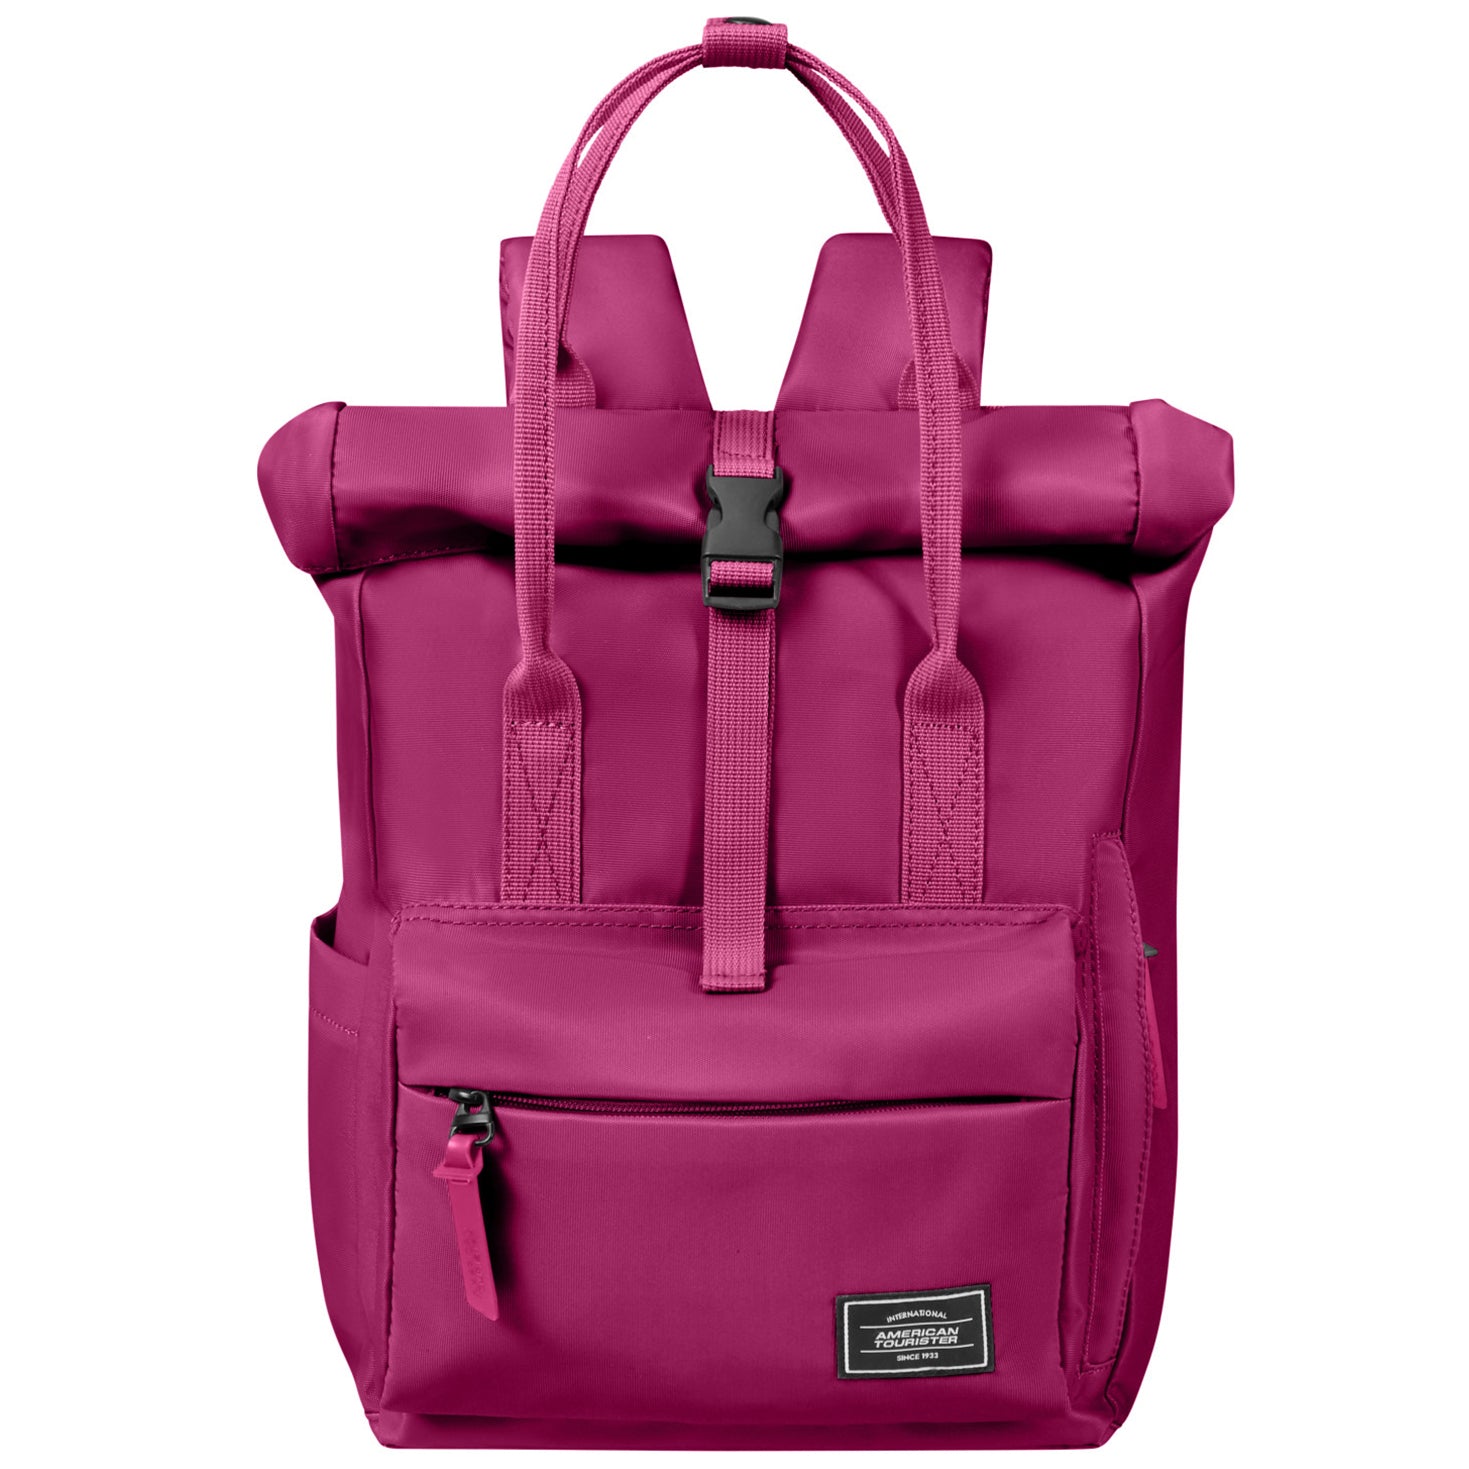 American Tourister Urban Groove City Sac à dos 36 cm - Deep Orchid